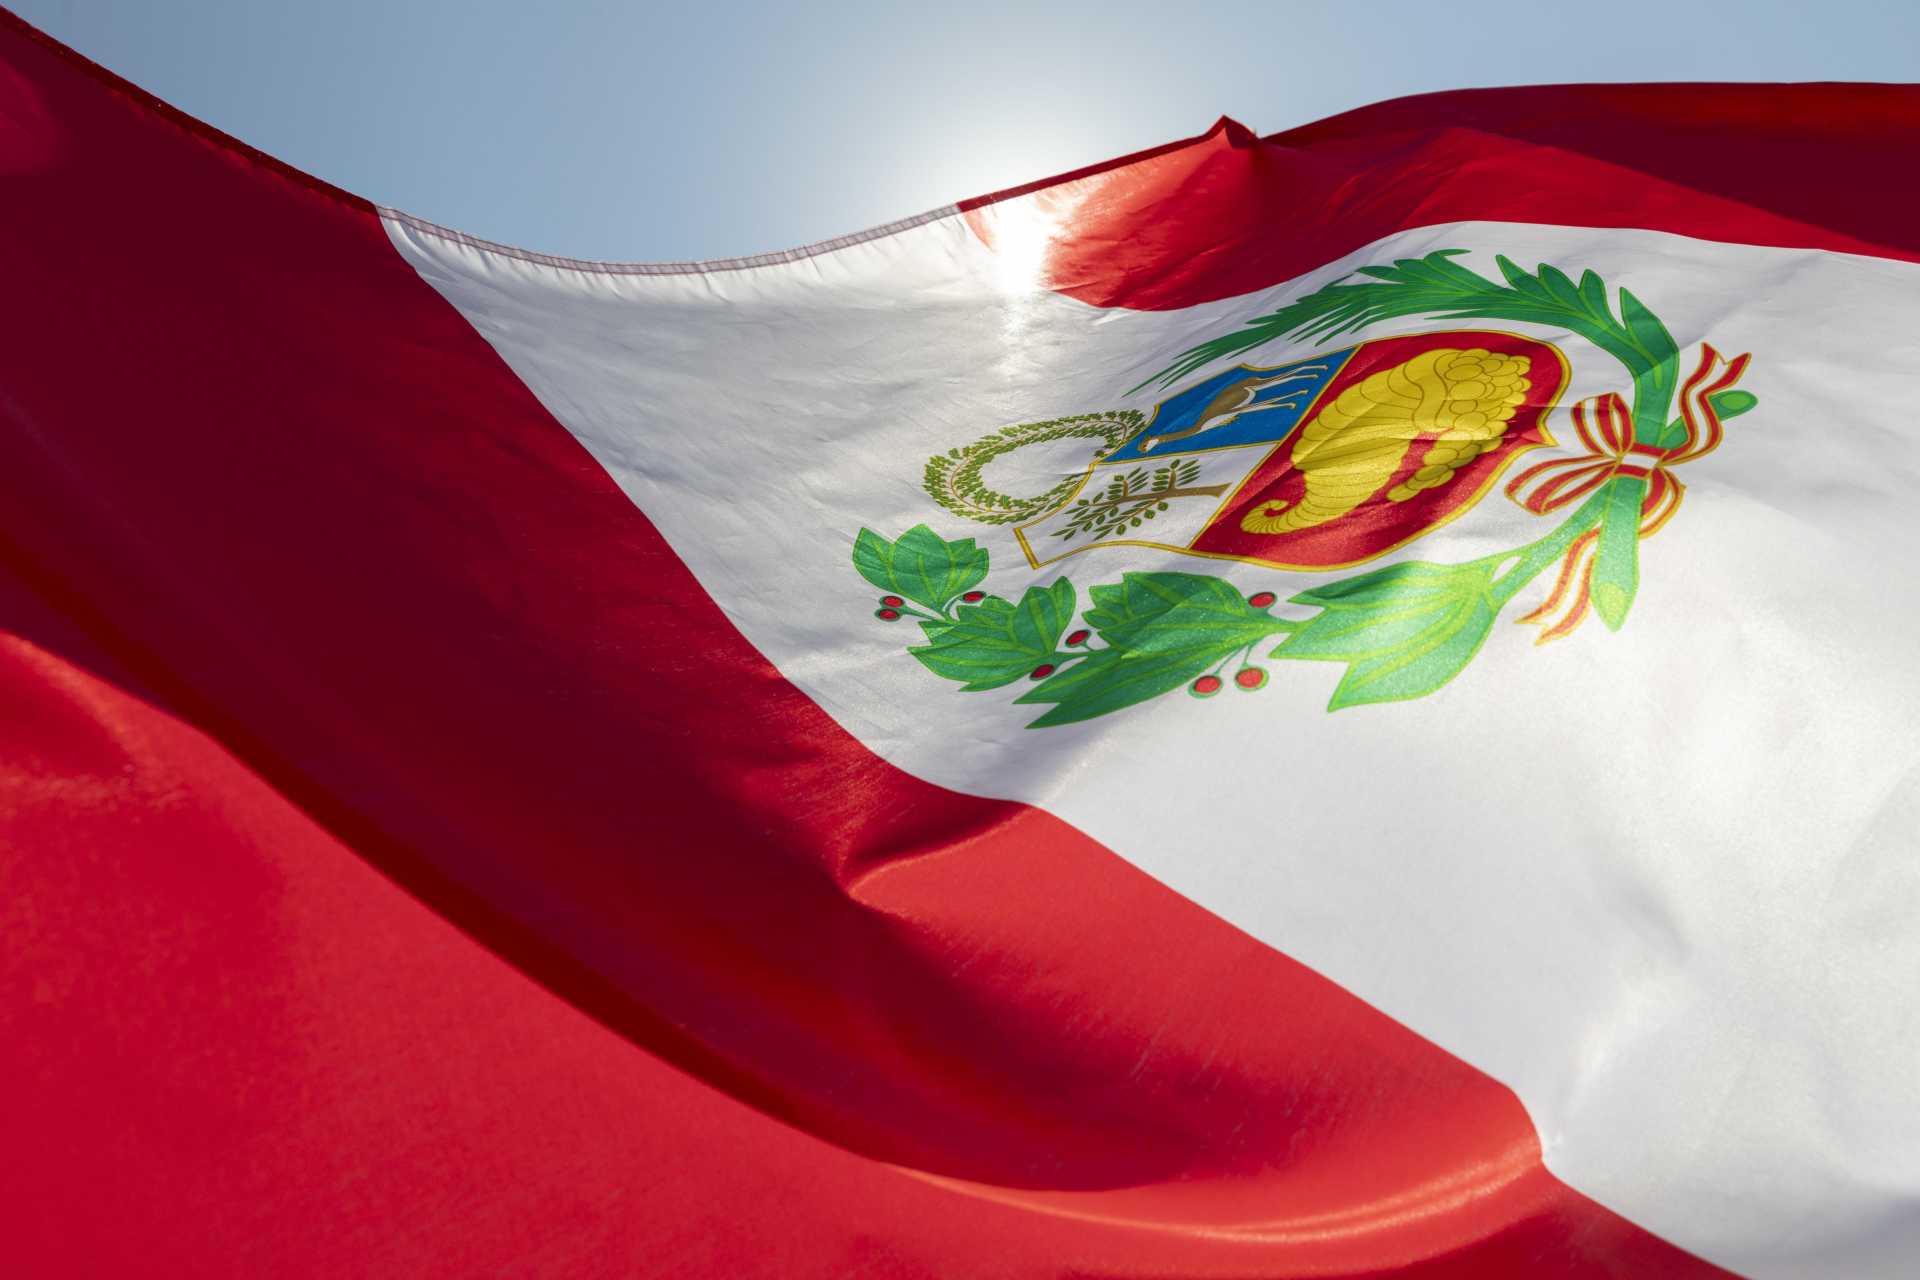 For the stability and democracy of Peru